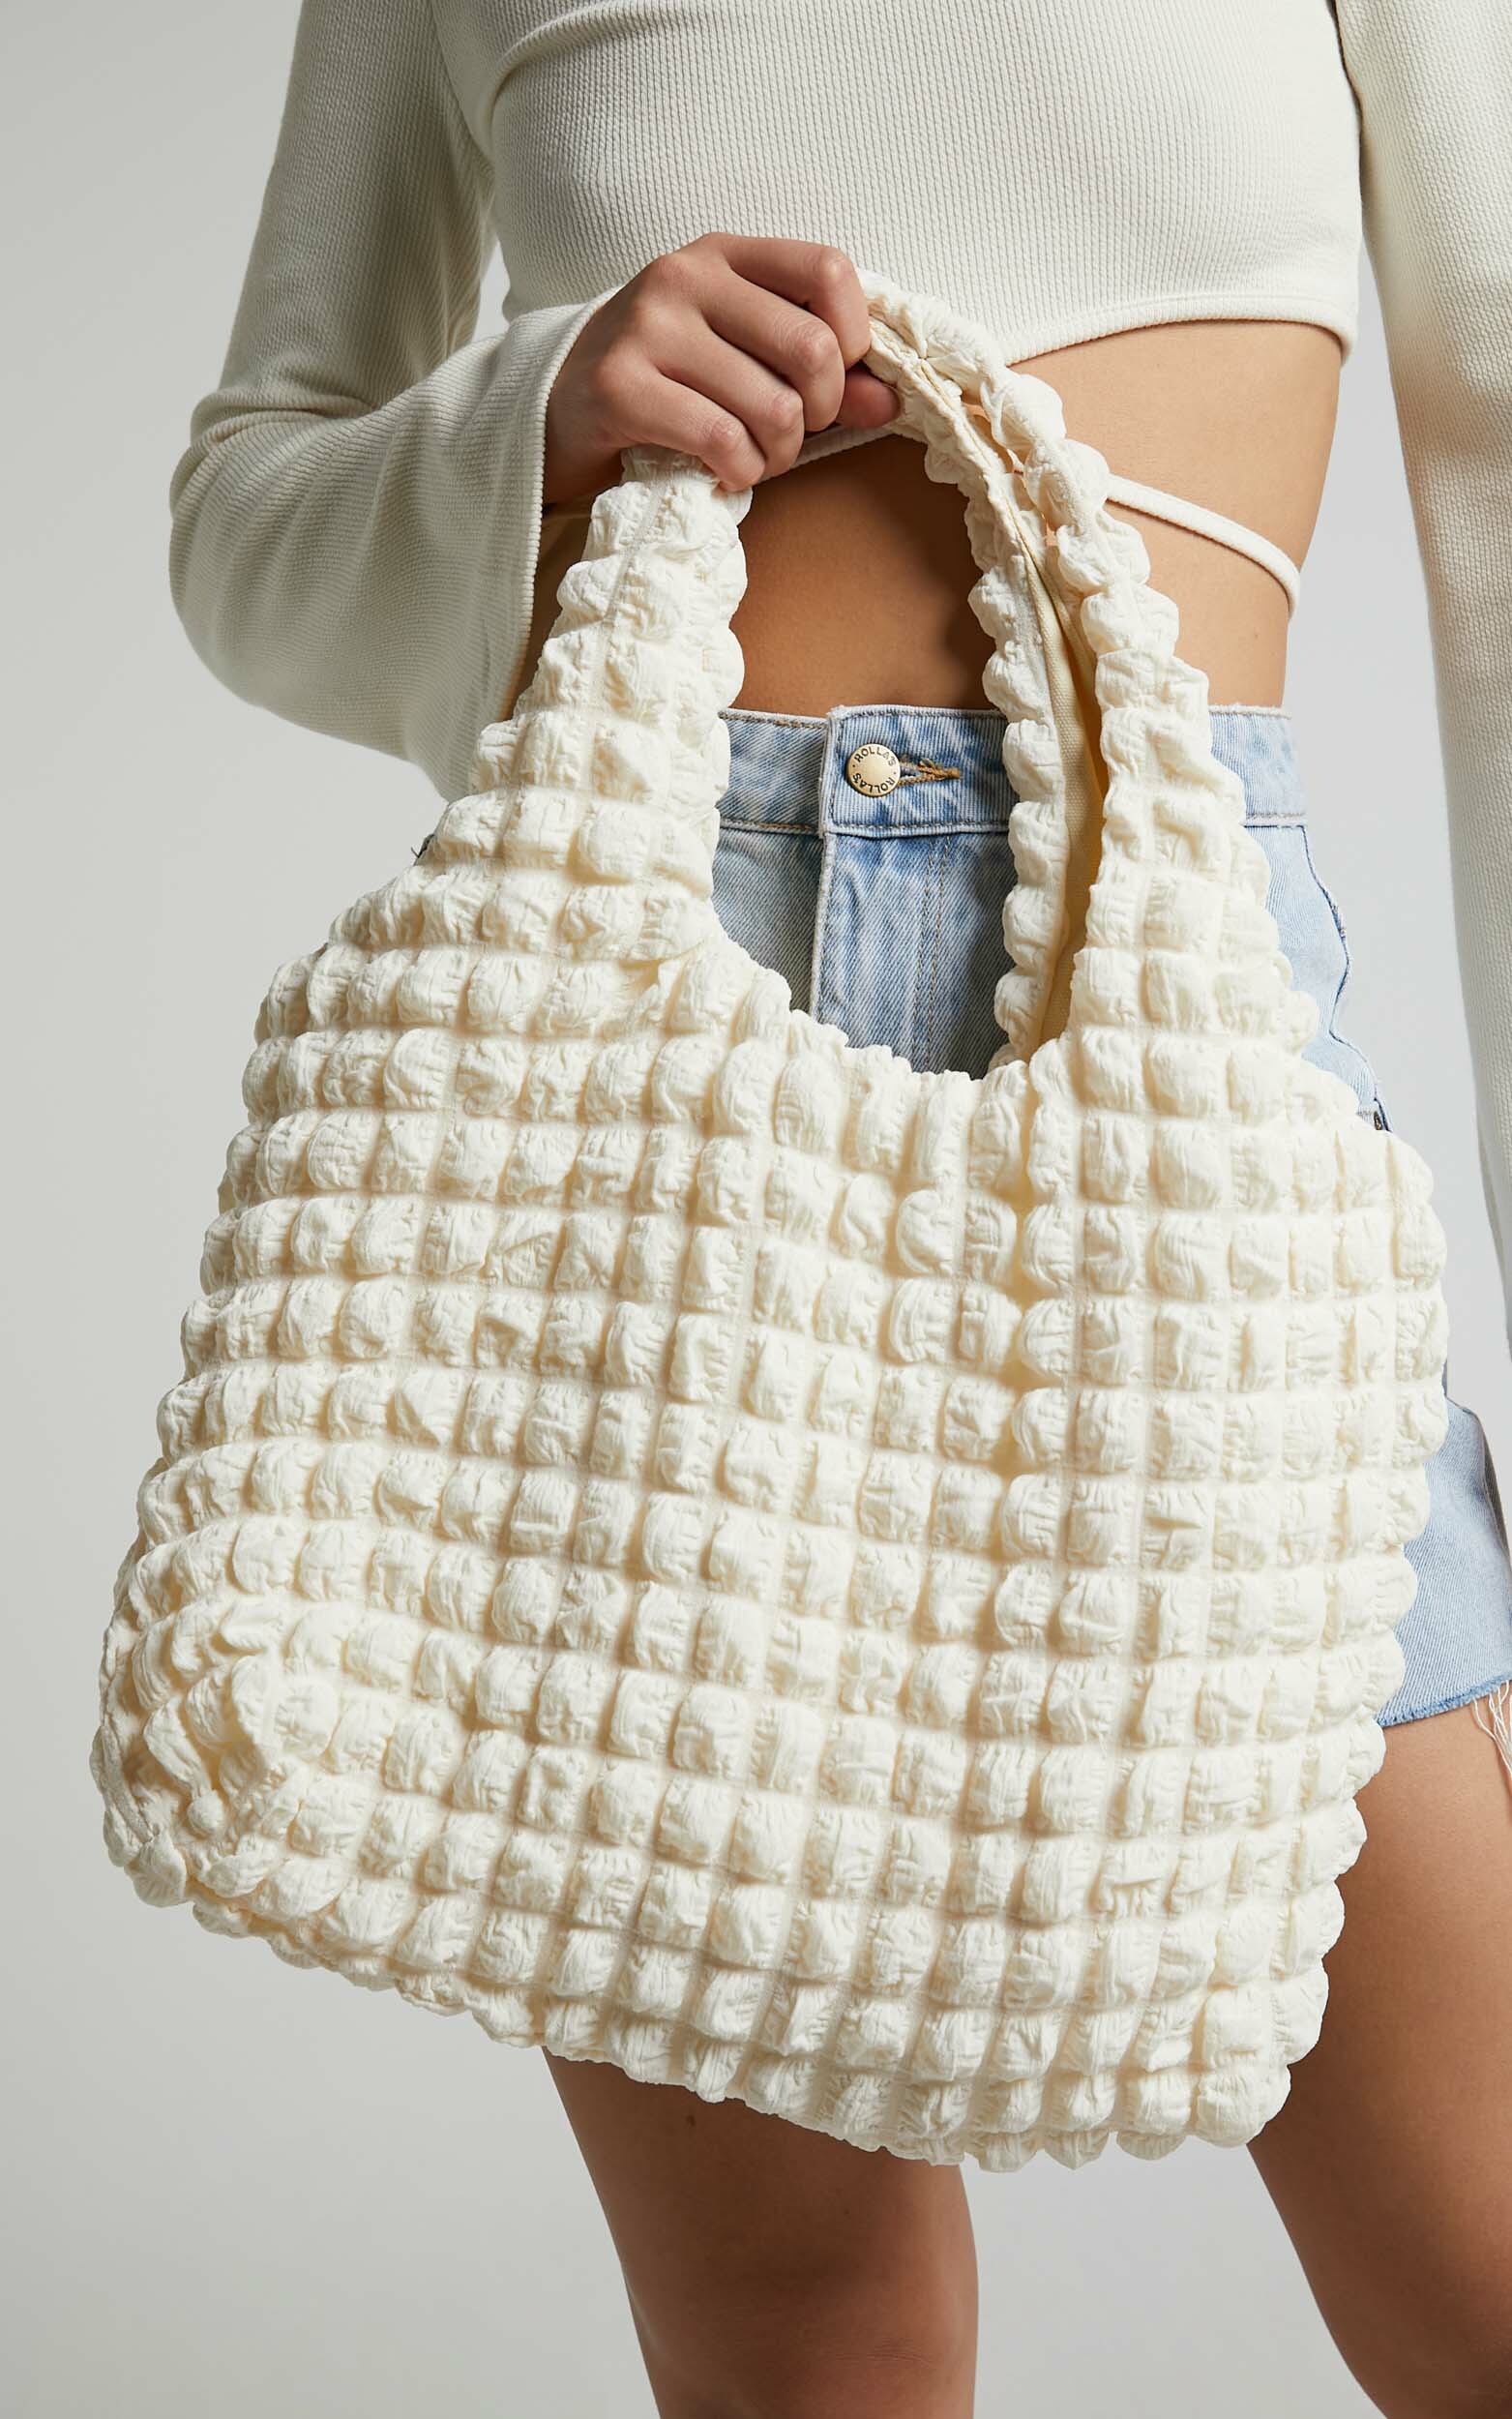 Jenevera Bag - Quilted Puff Bag in White - NoSize, WHT2, hi-res image number null